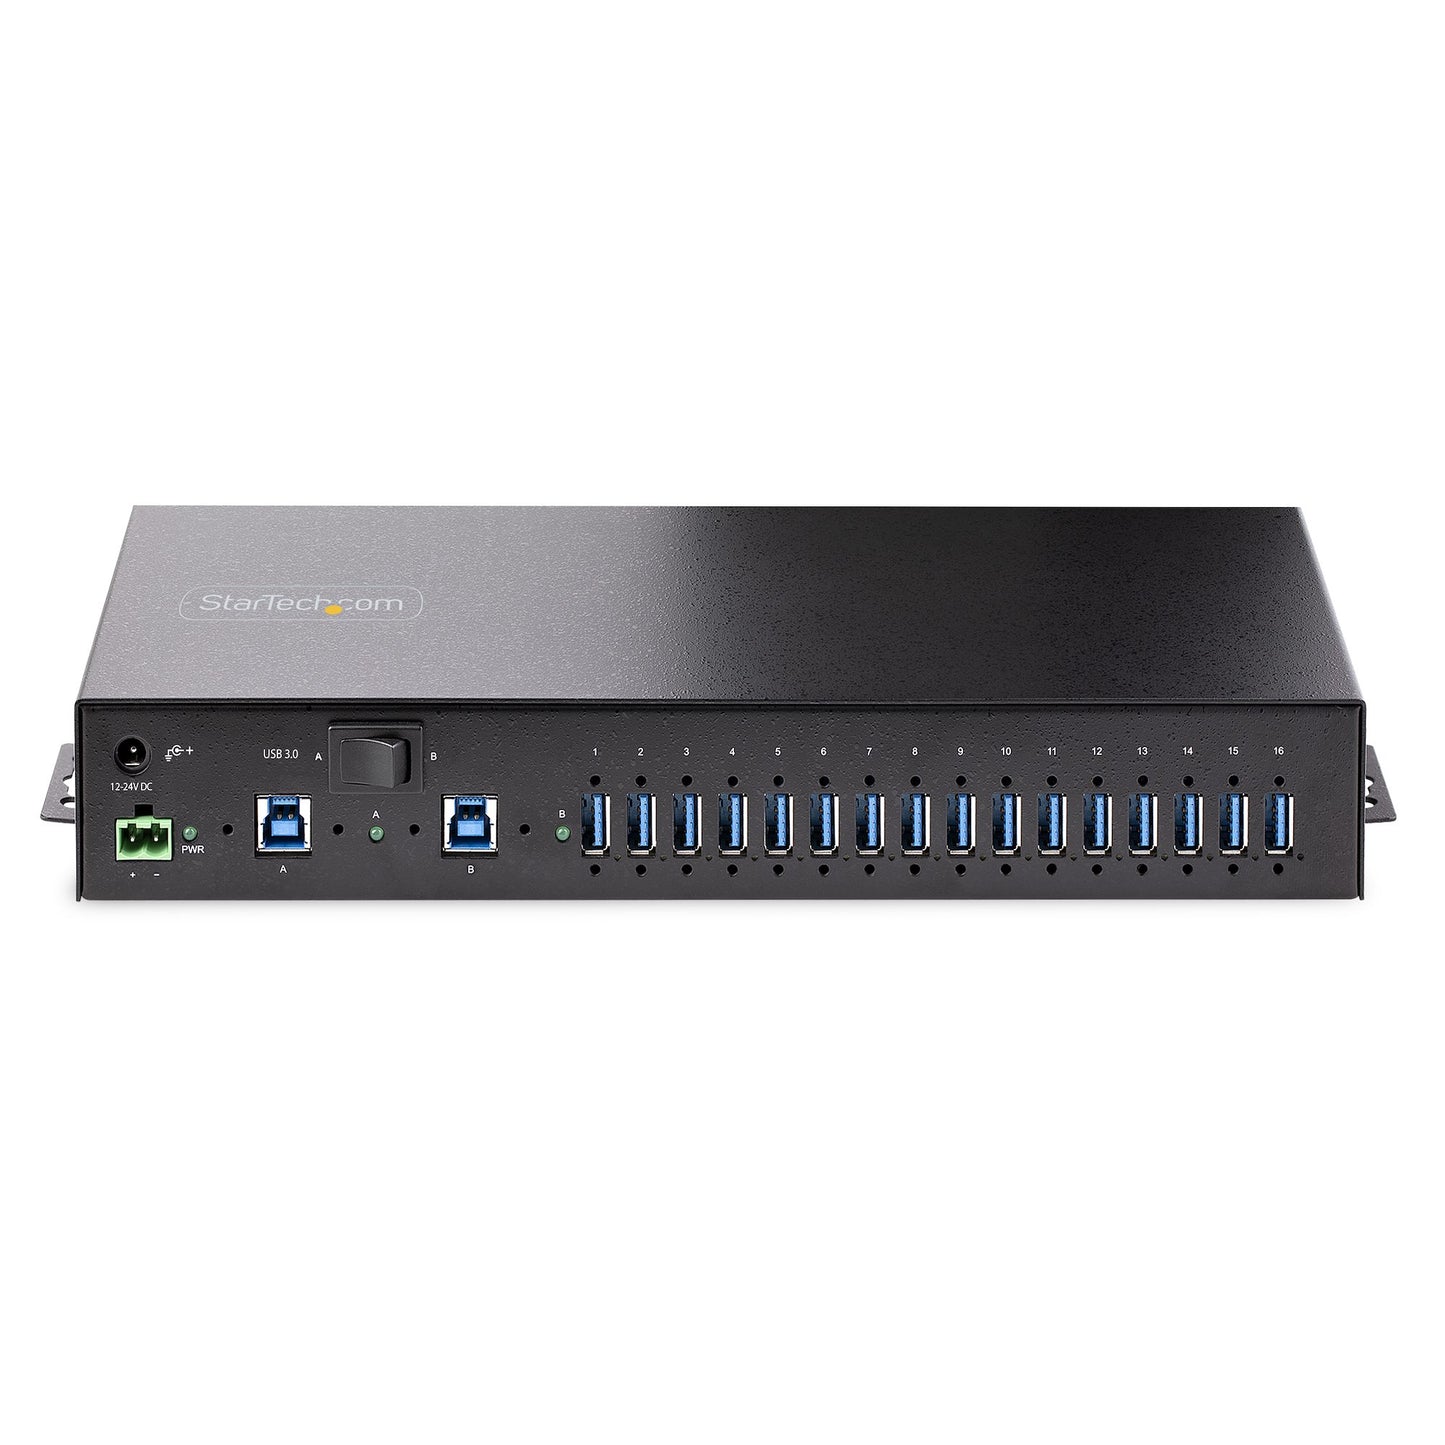 StarTech.com 16-Port Industrial USB 3.0 Hub 5Gbps, Metal, DIN/Surface/Rack Mountable, ESD Protection, Terminal Block Power, up to 120W Shared USB Charging, Dual-Host Hub/Switch-2